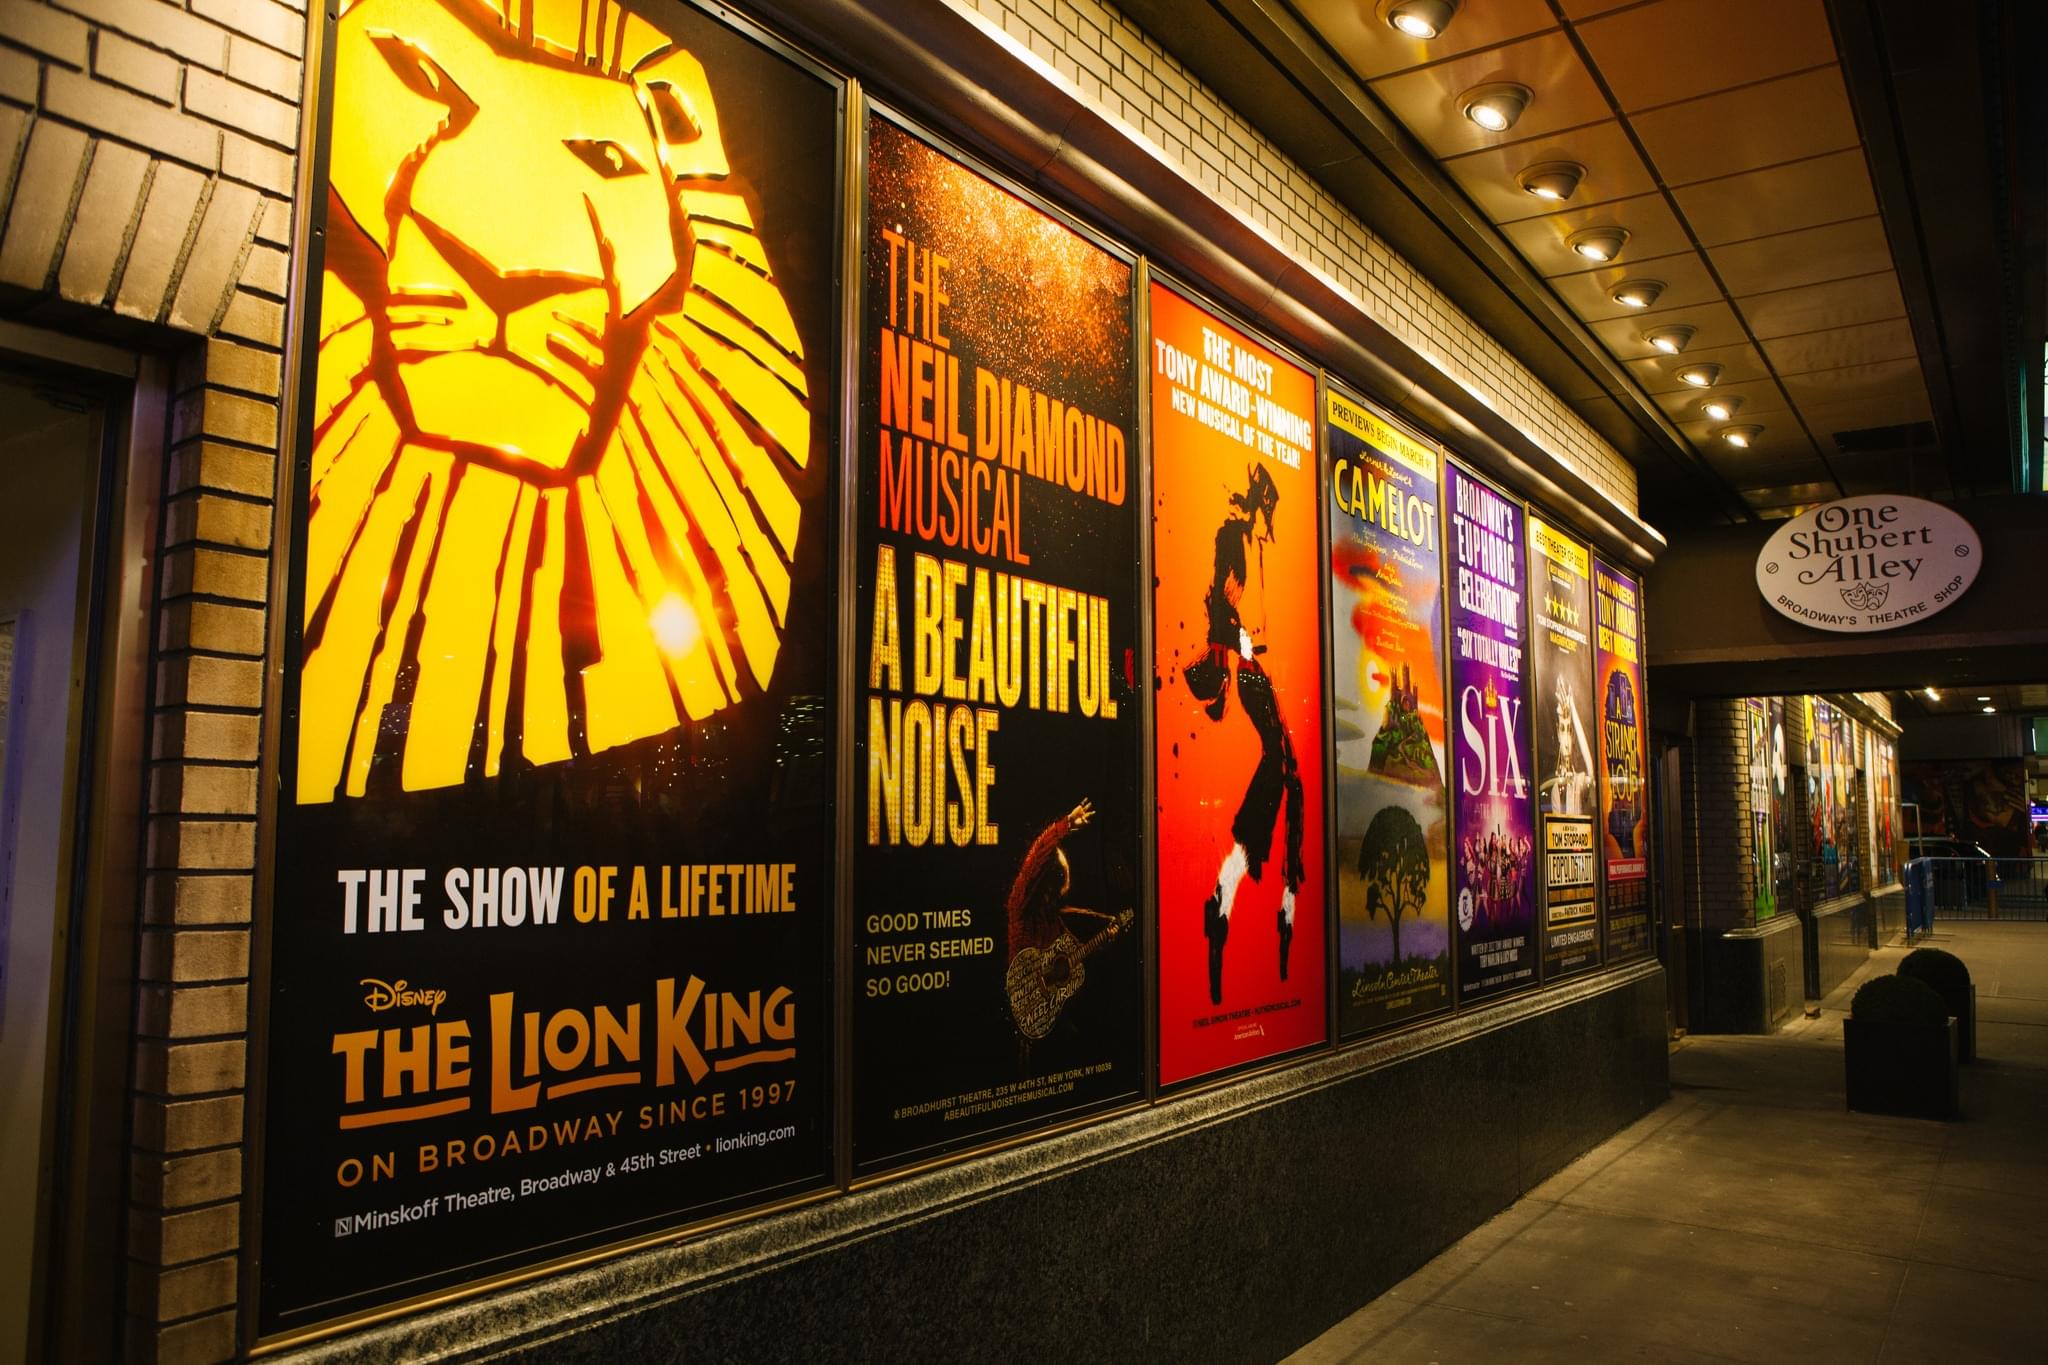 Top Broadway Shows Currently Running and Selling Tickets